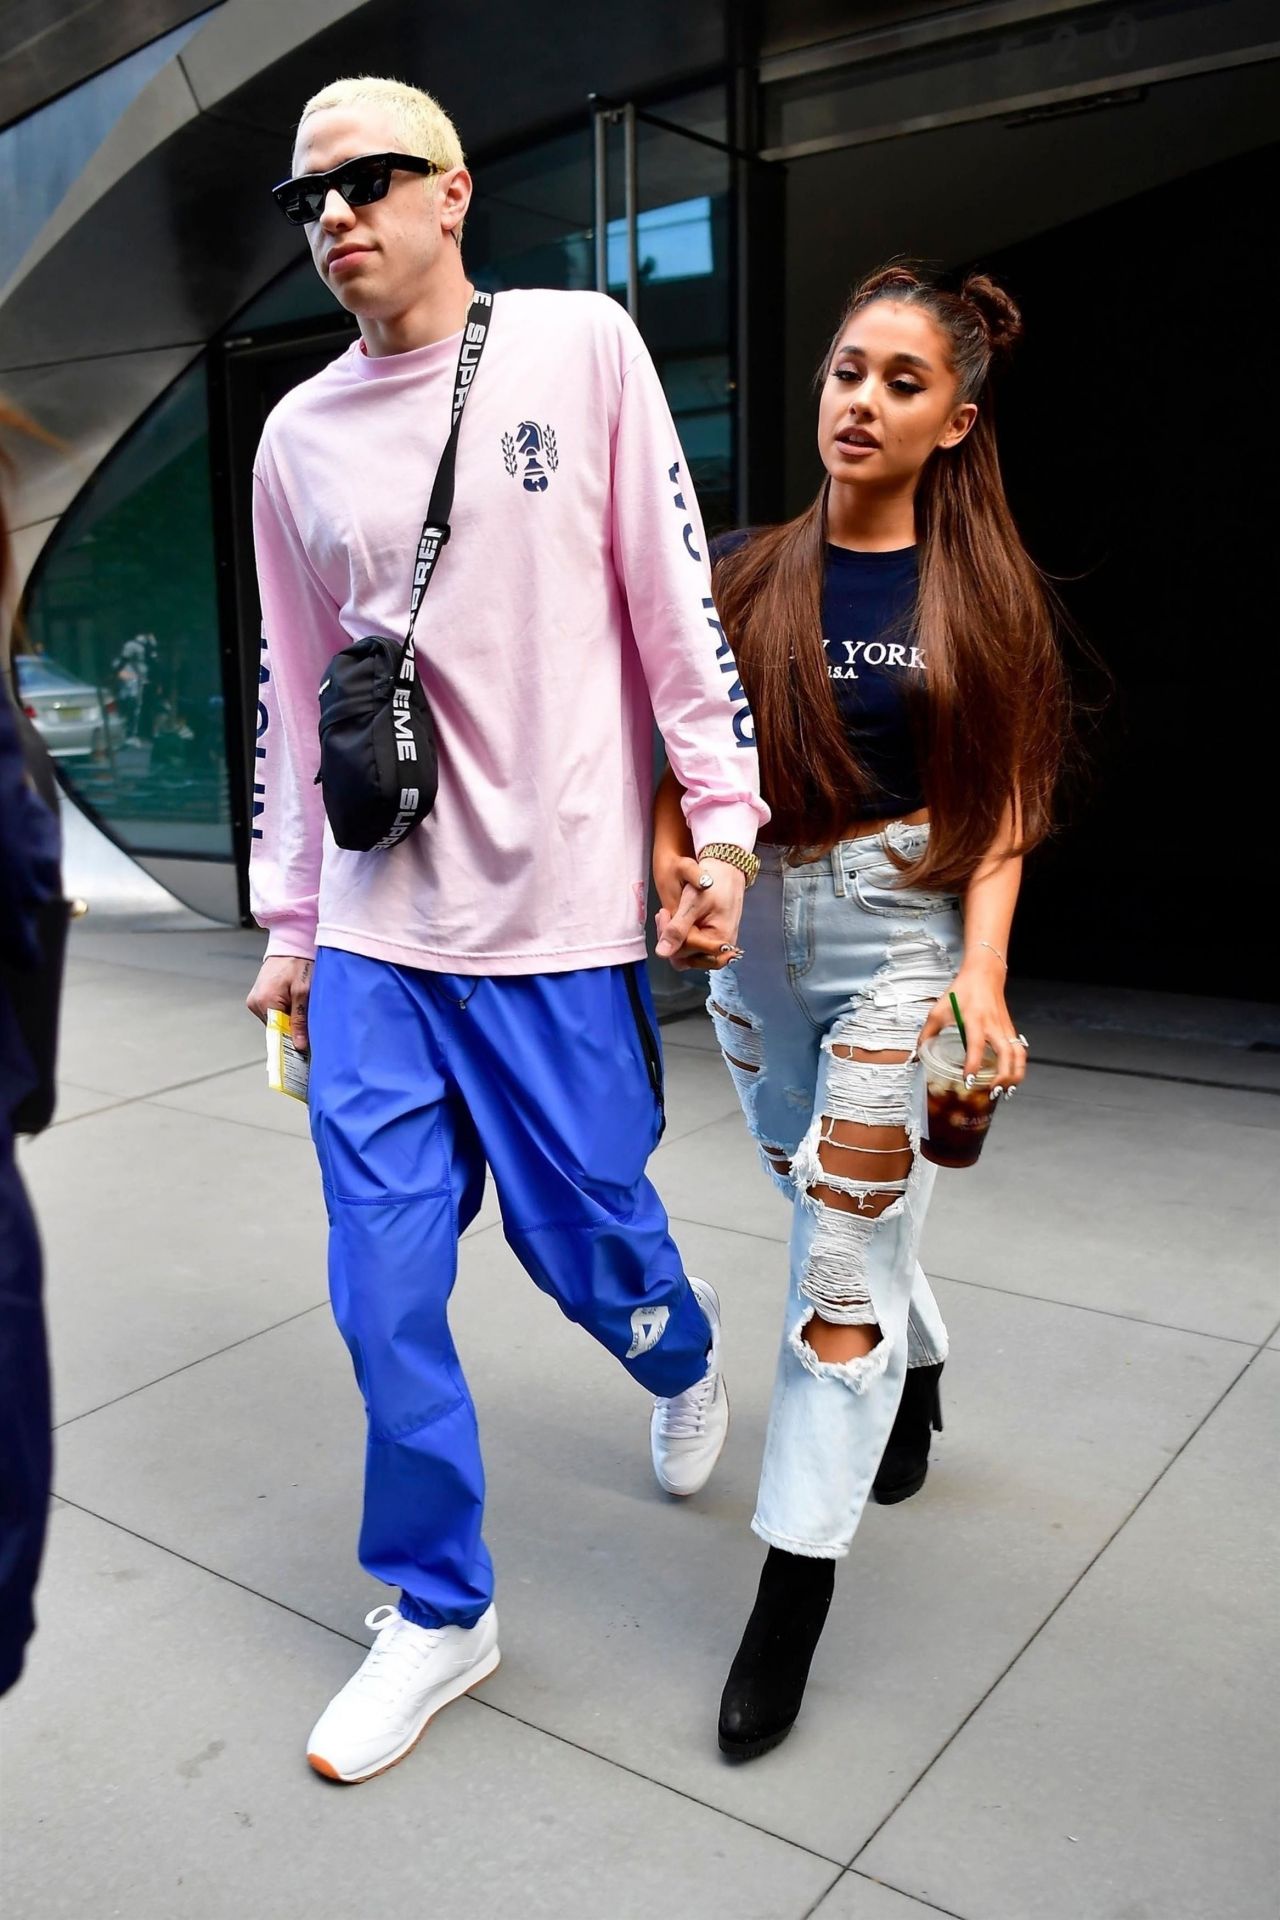 ariana-grande-and-pete-davidson-heading-to-her-concert-in-new-york-3.jpg